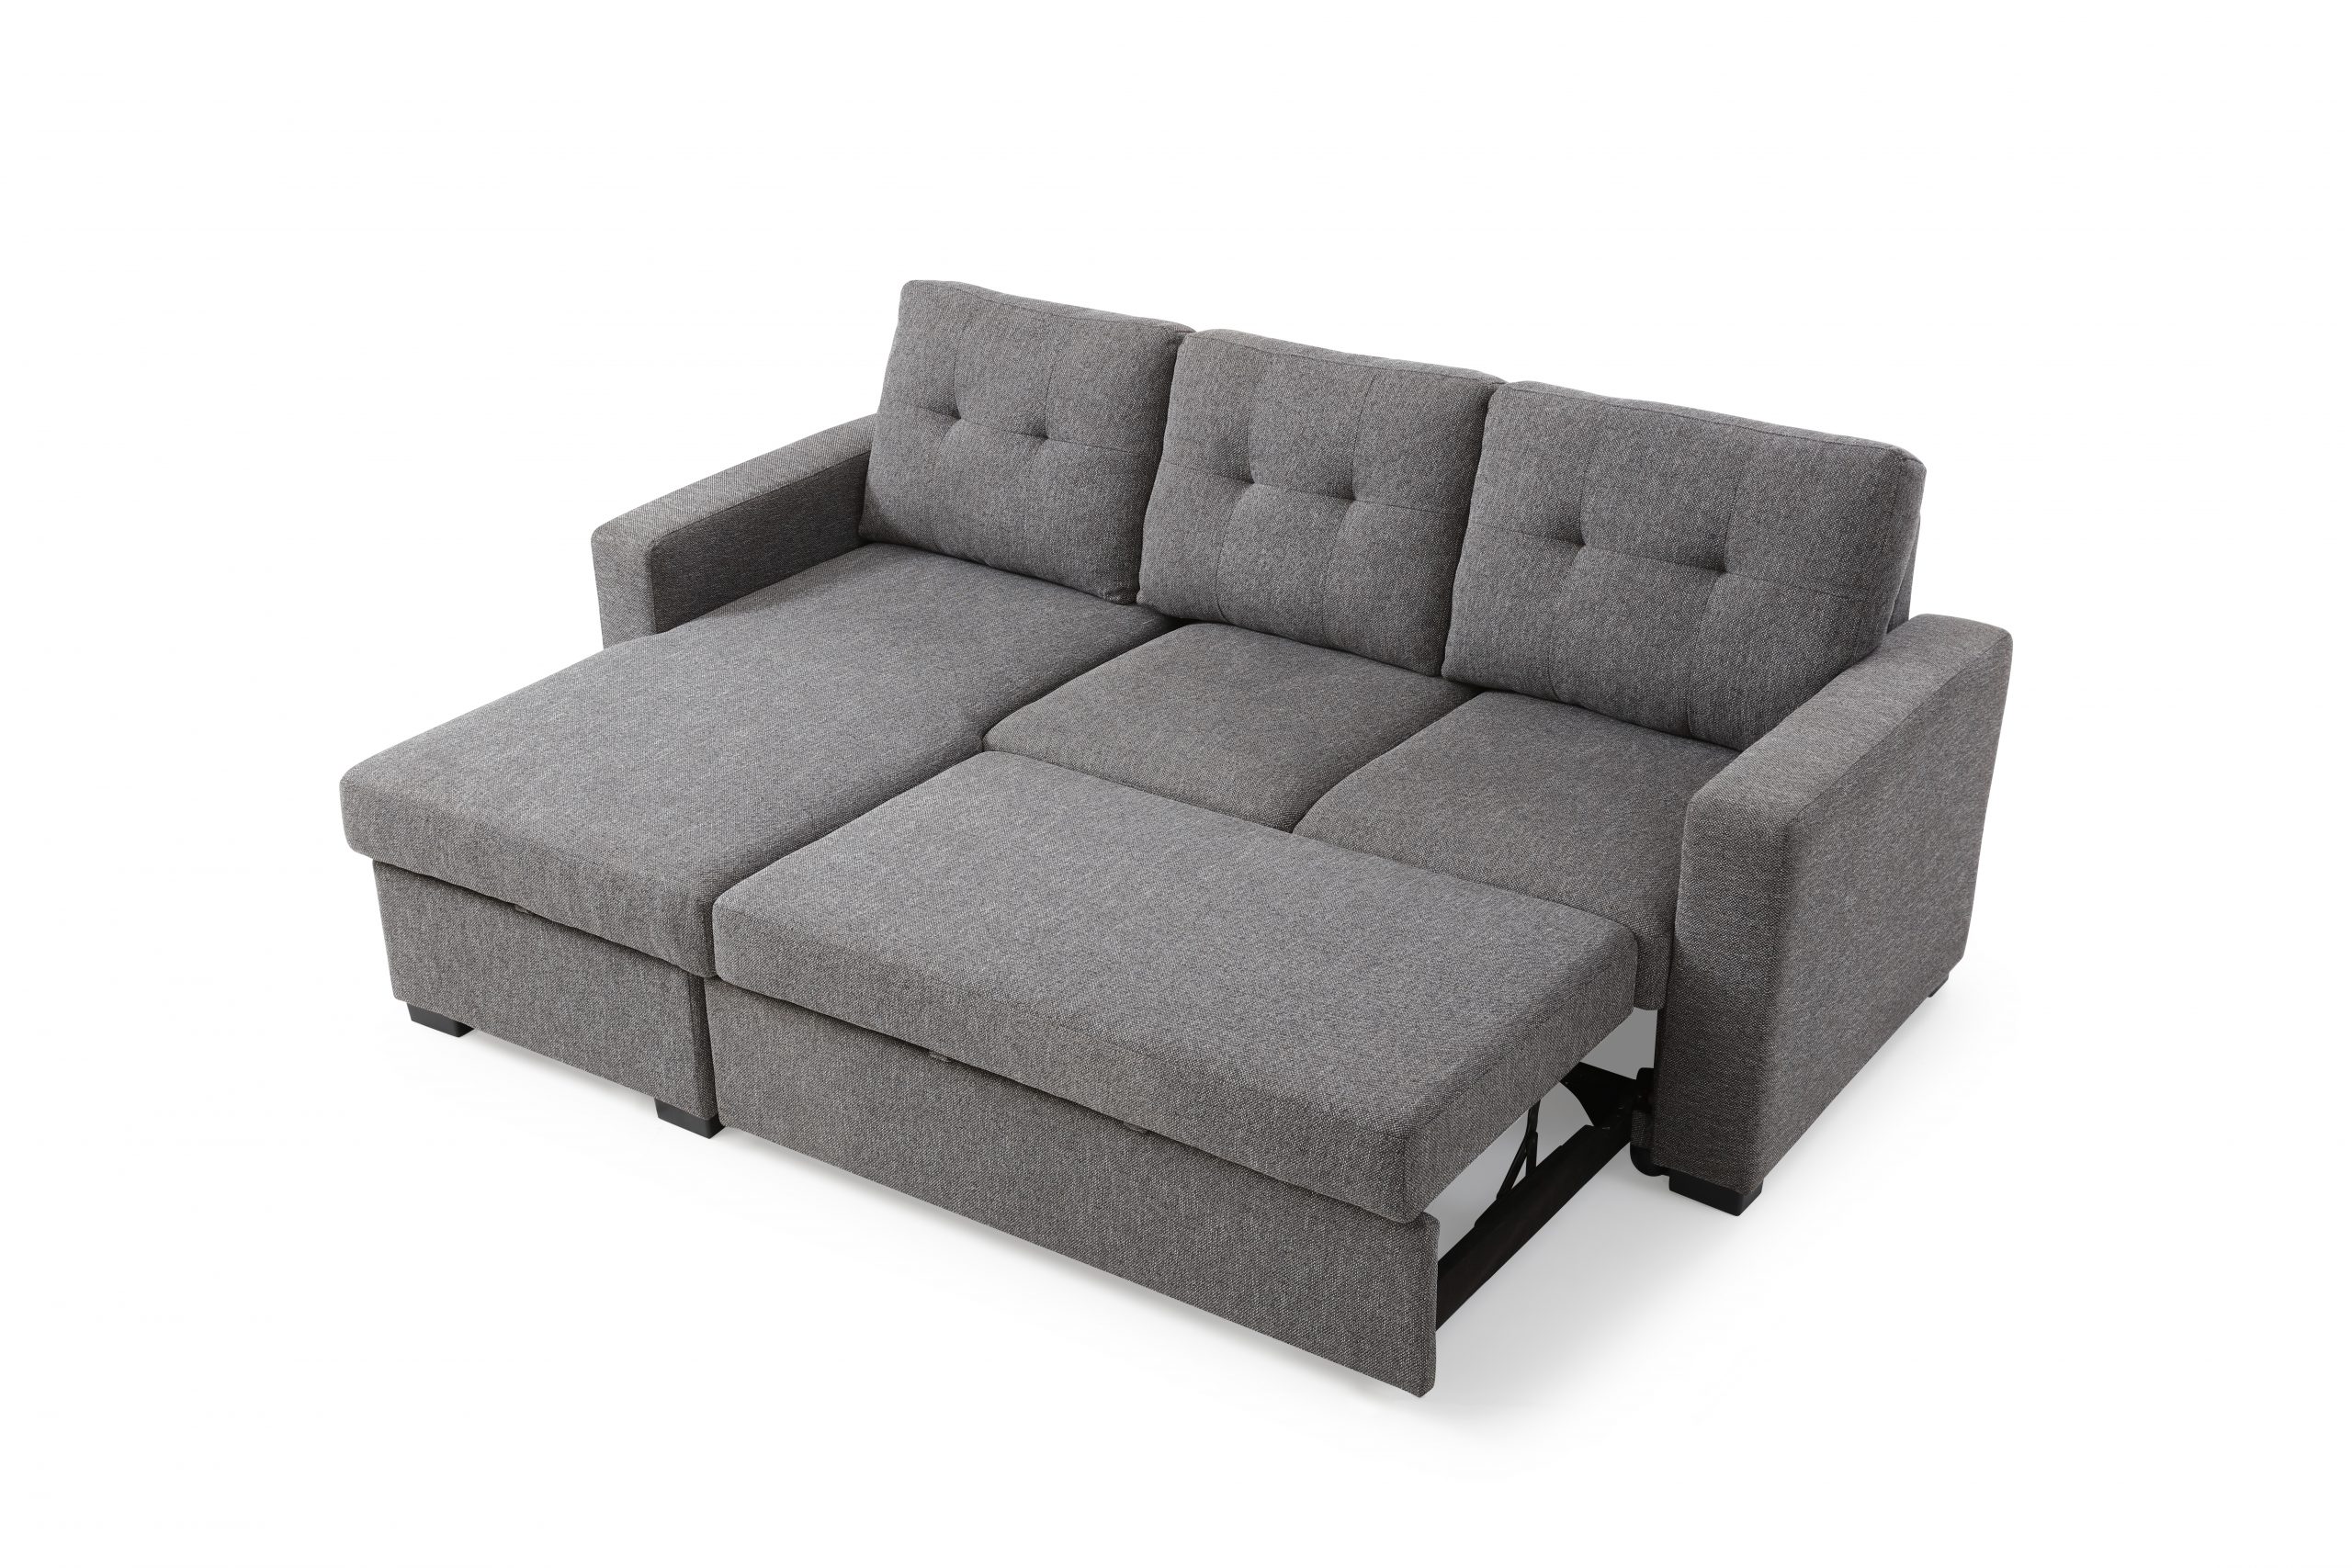 sofa bed 60 inches wide